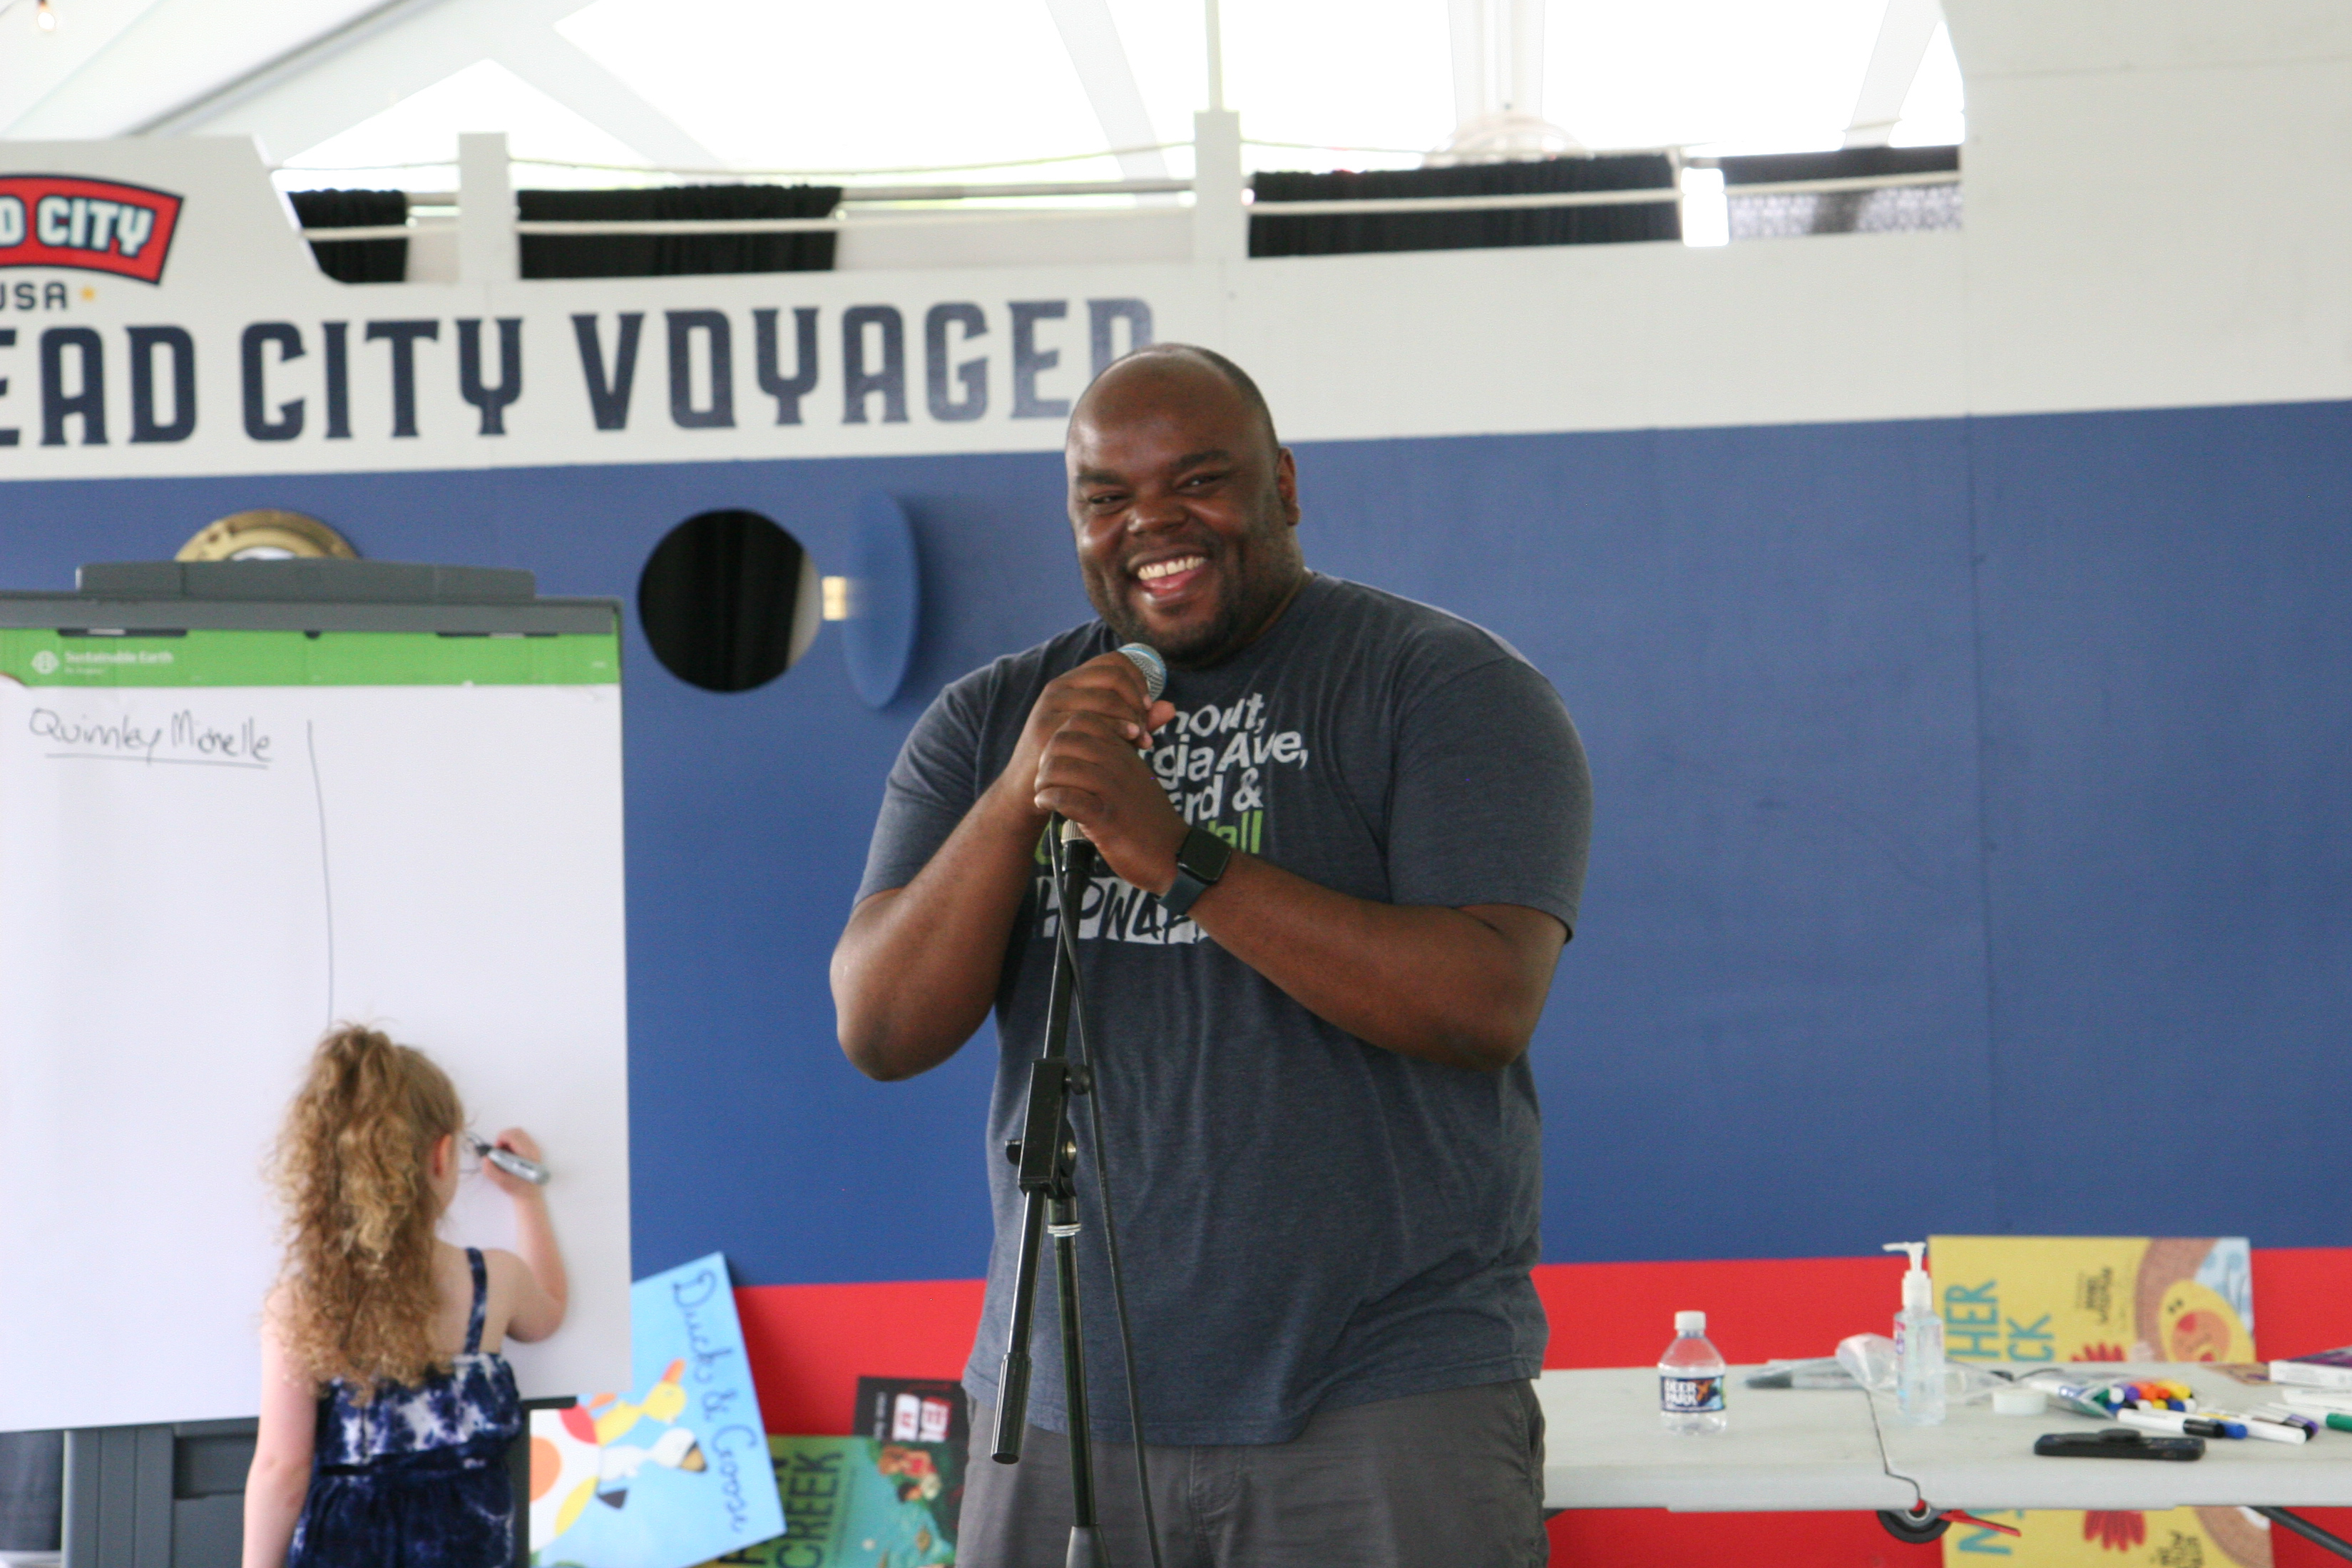 Photo of author Kwame Mbalia in front of painted Read City Voyager ship background